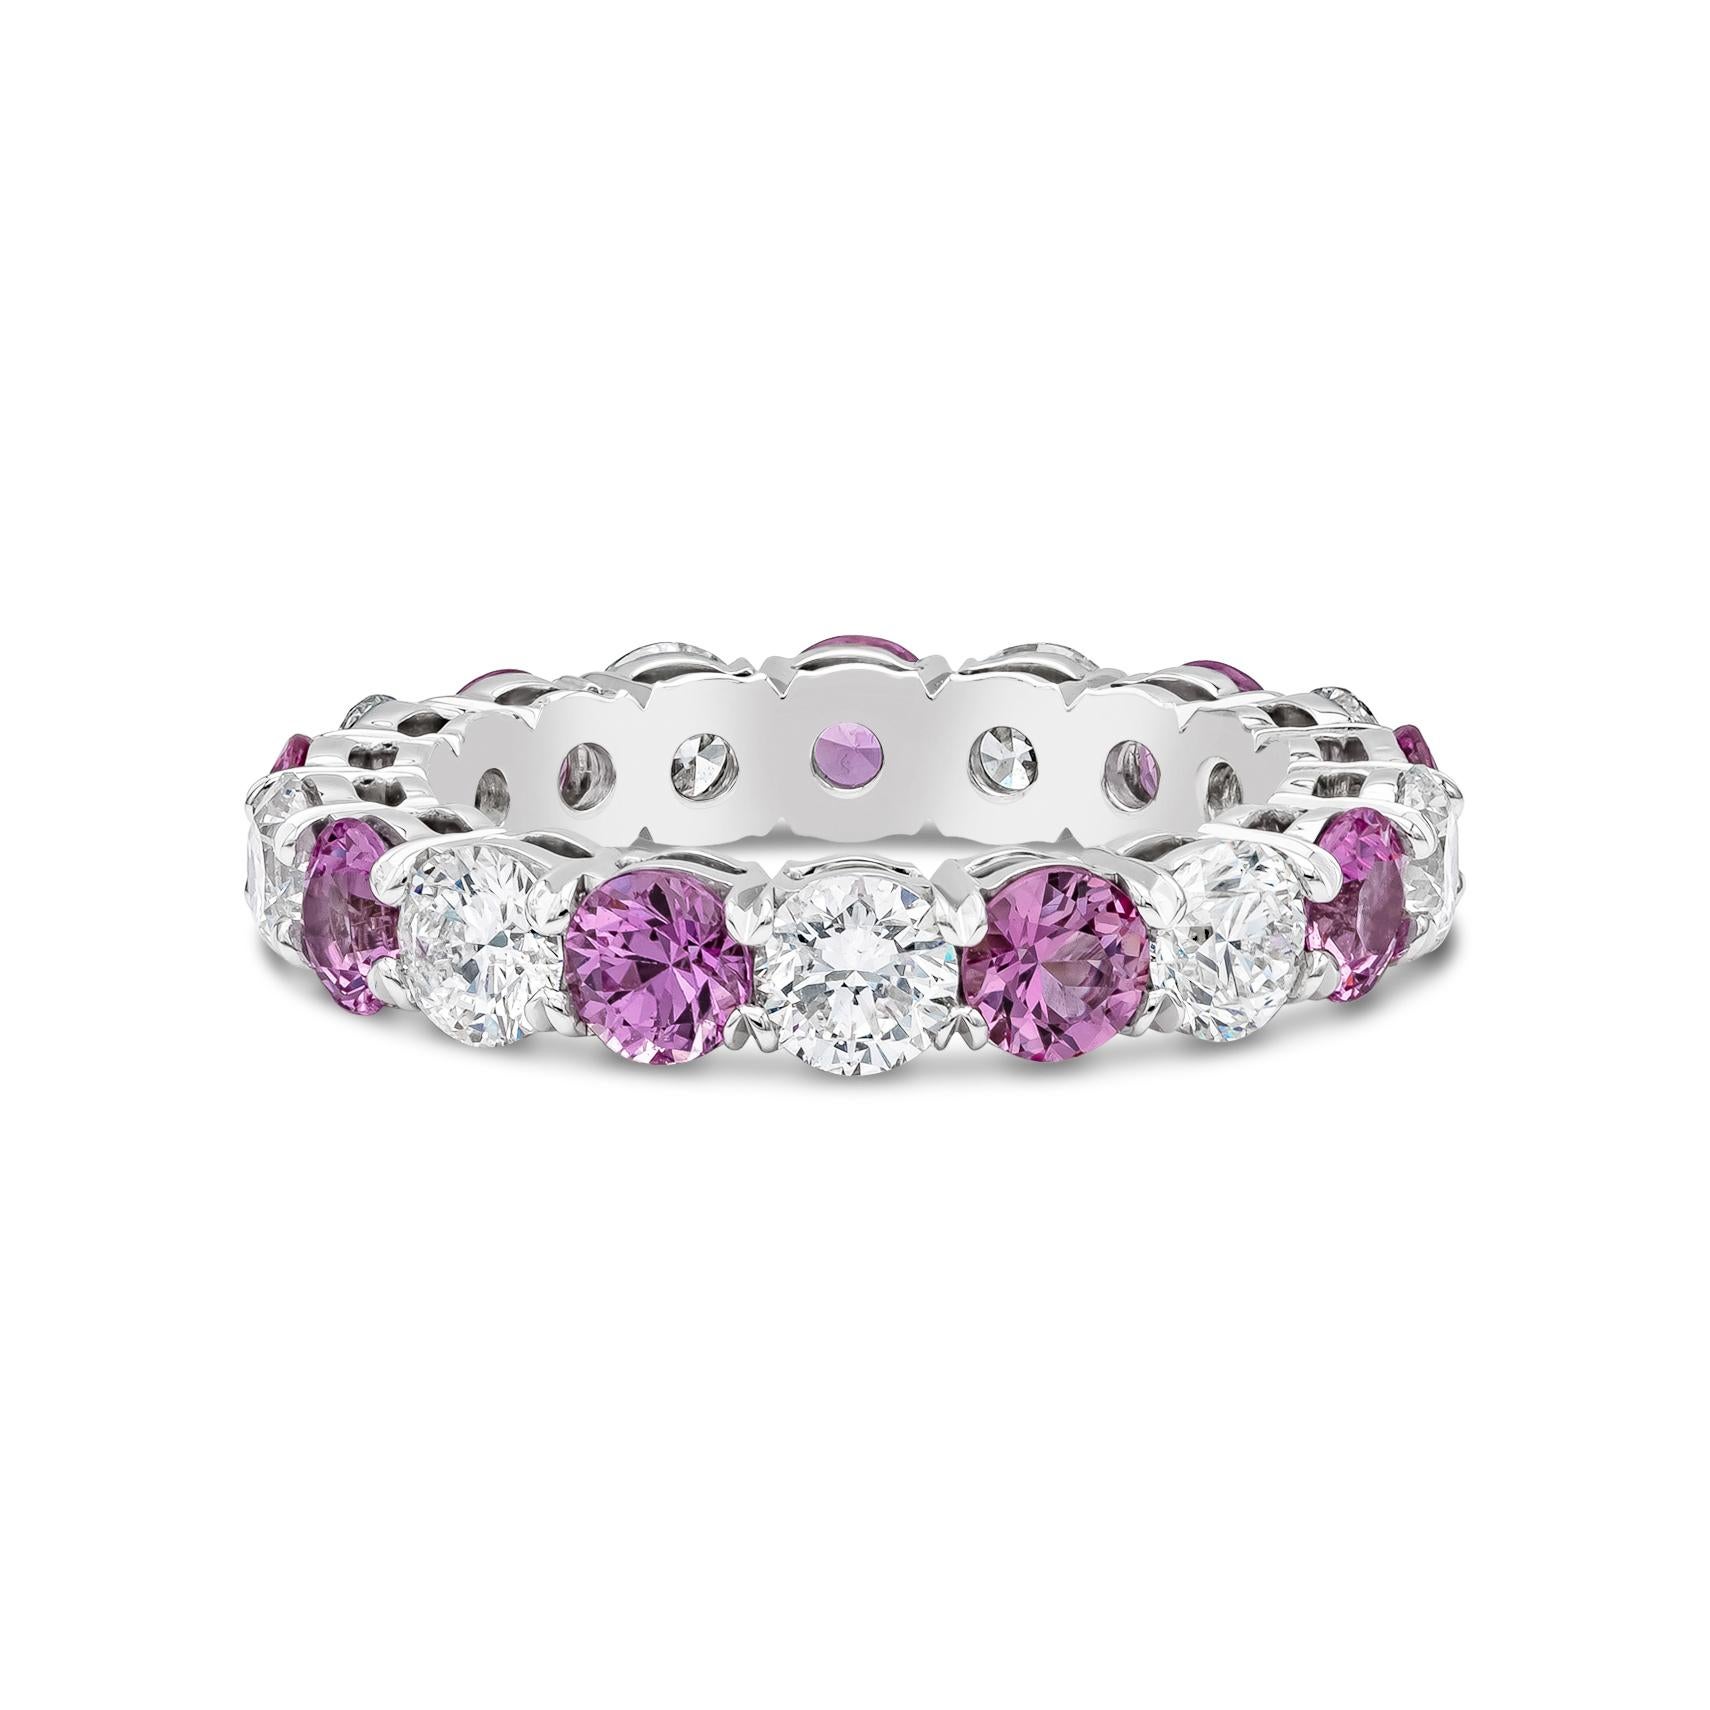 A stylish eternity wedding band features round vibrant pink sapphires weighing 2.38 carats, VS in Clarity, elegantly alternates with round brilliant diamonds weighing 2.20 carats total, F Color and SI in Clarity. Set in a shared prong, open gallery